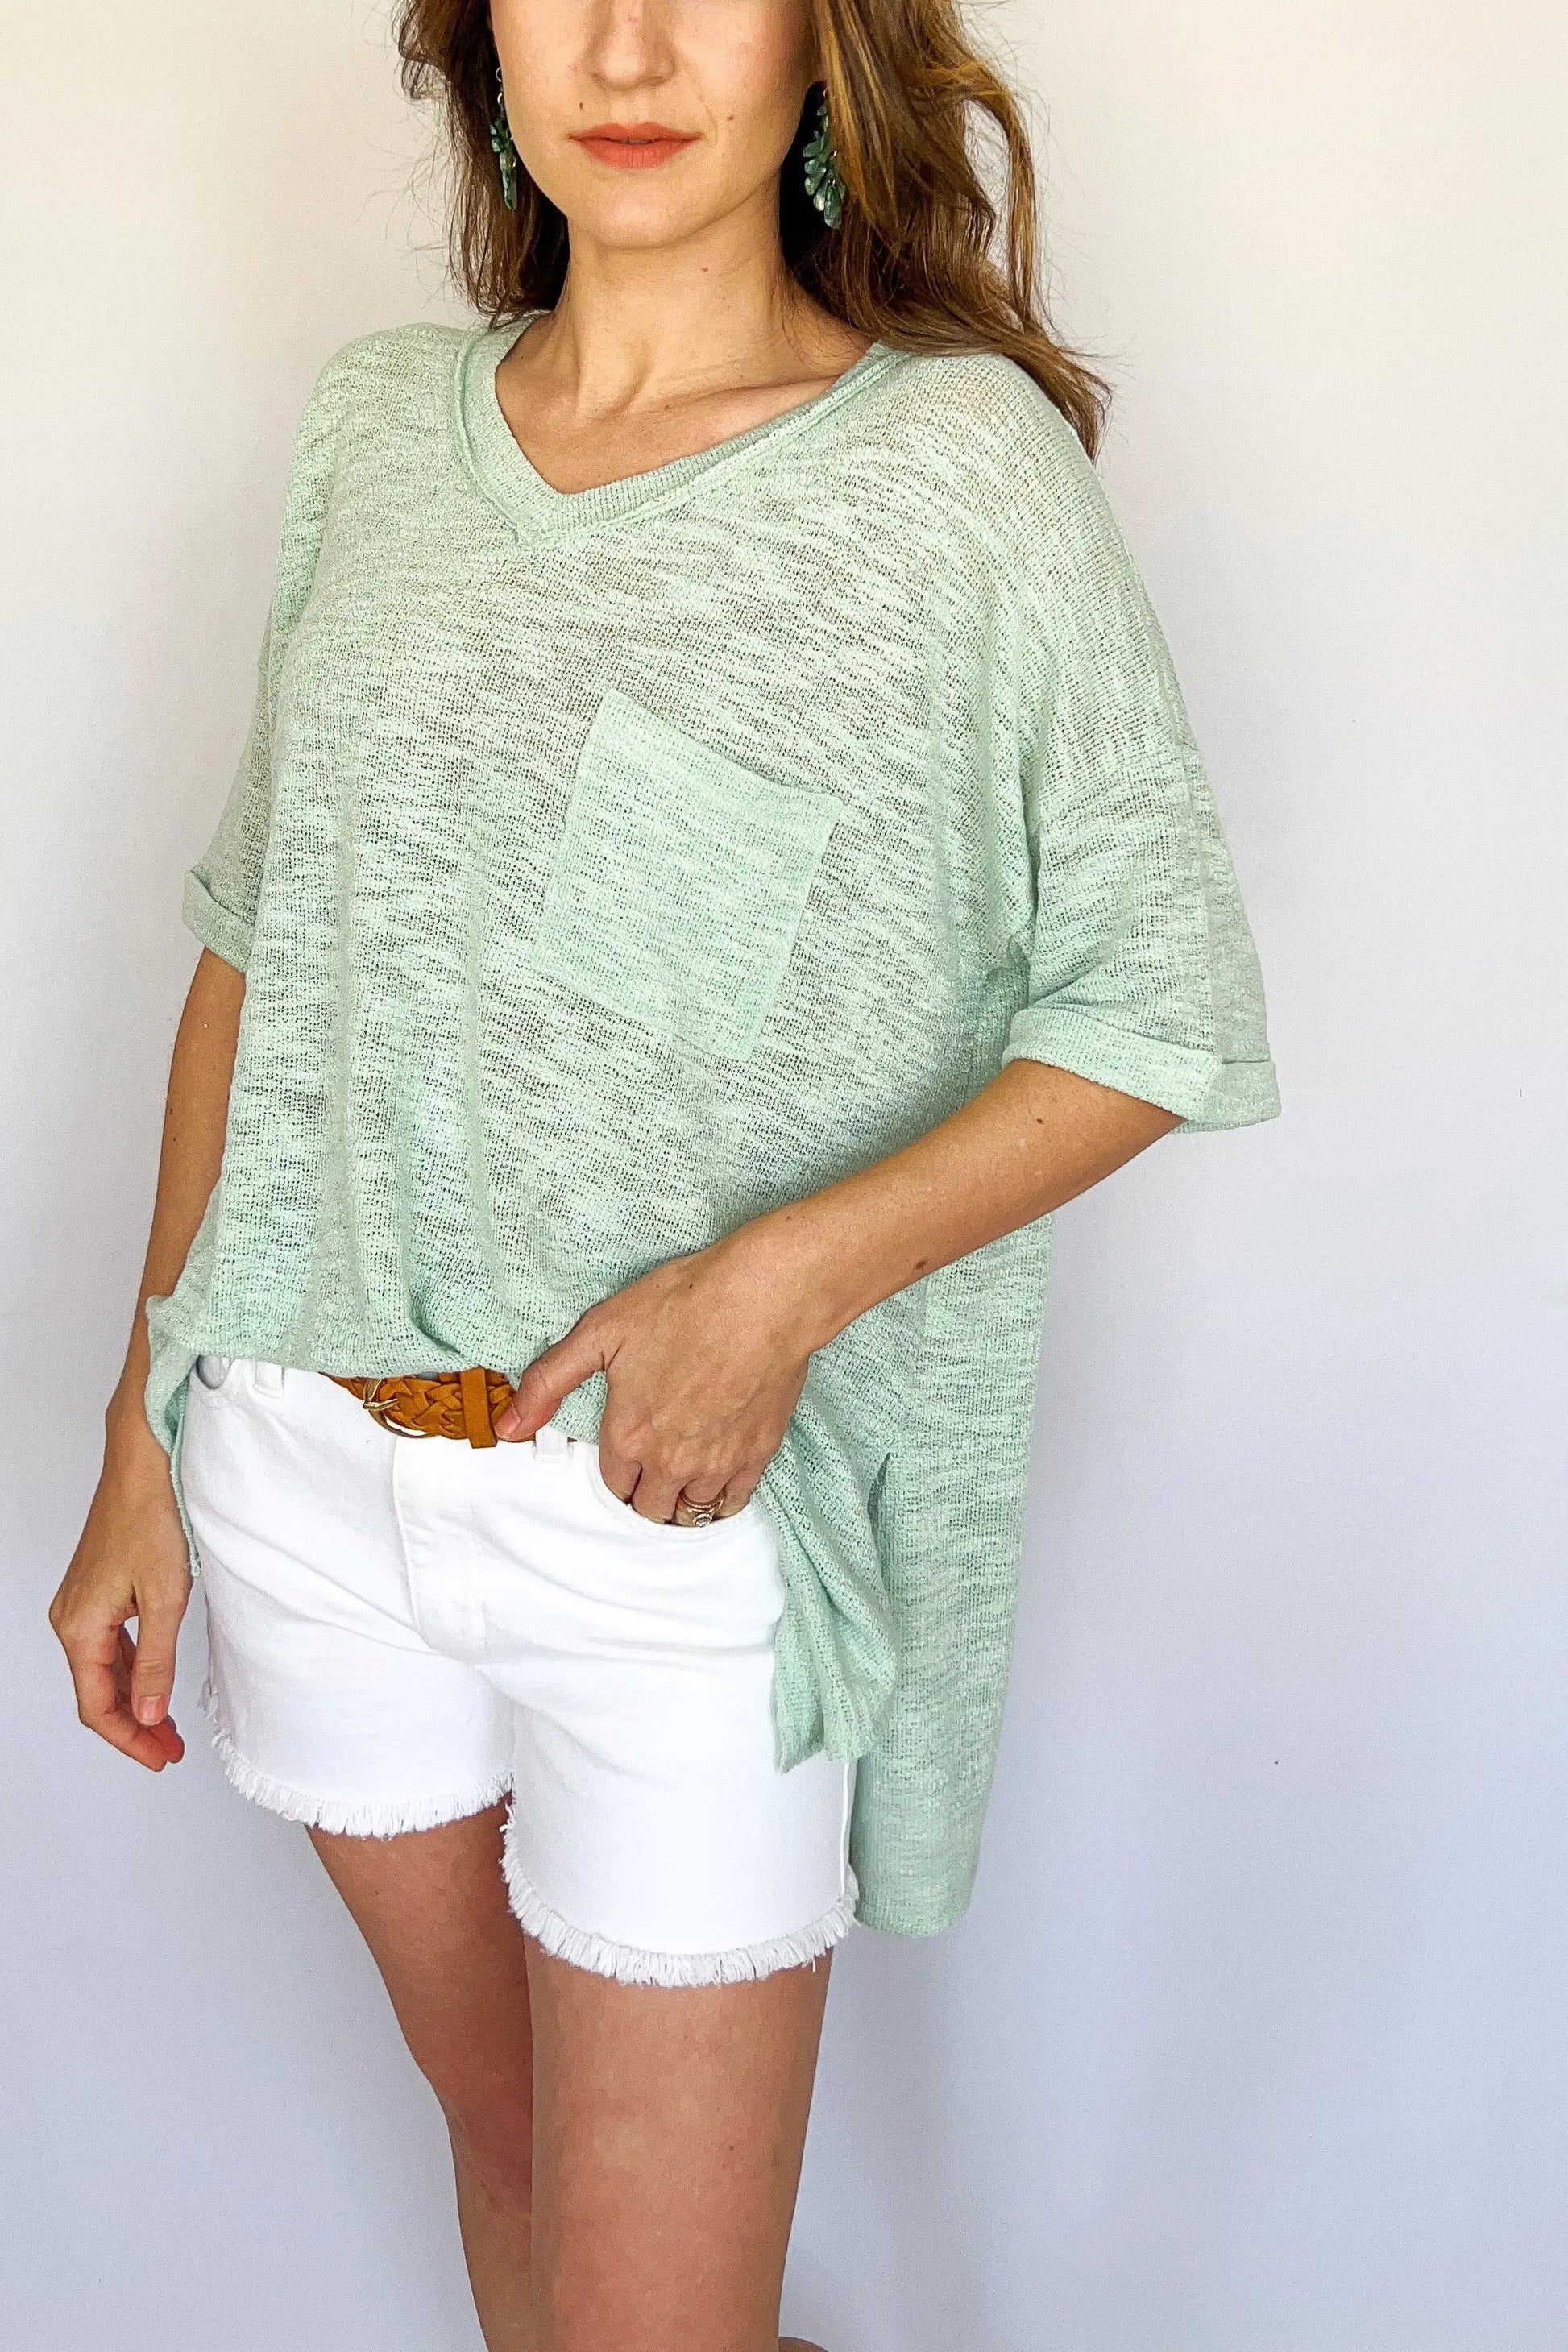 The Tiny Details Mint Relaxed Short Sleeve Pocket Tee